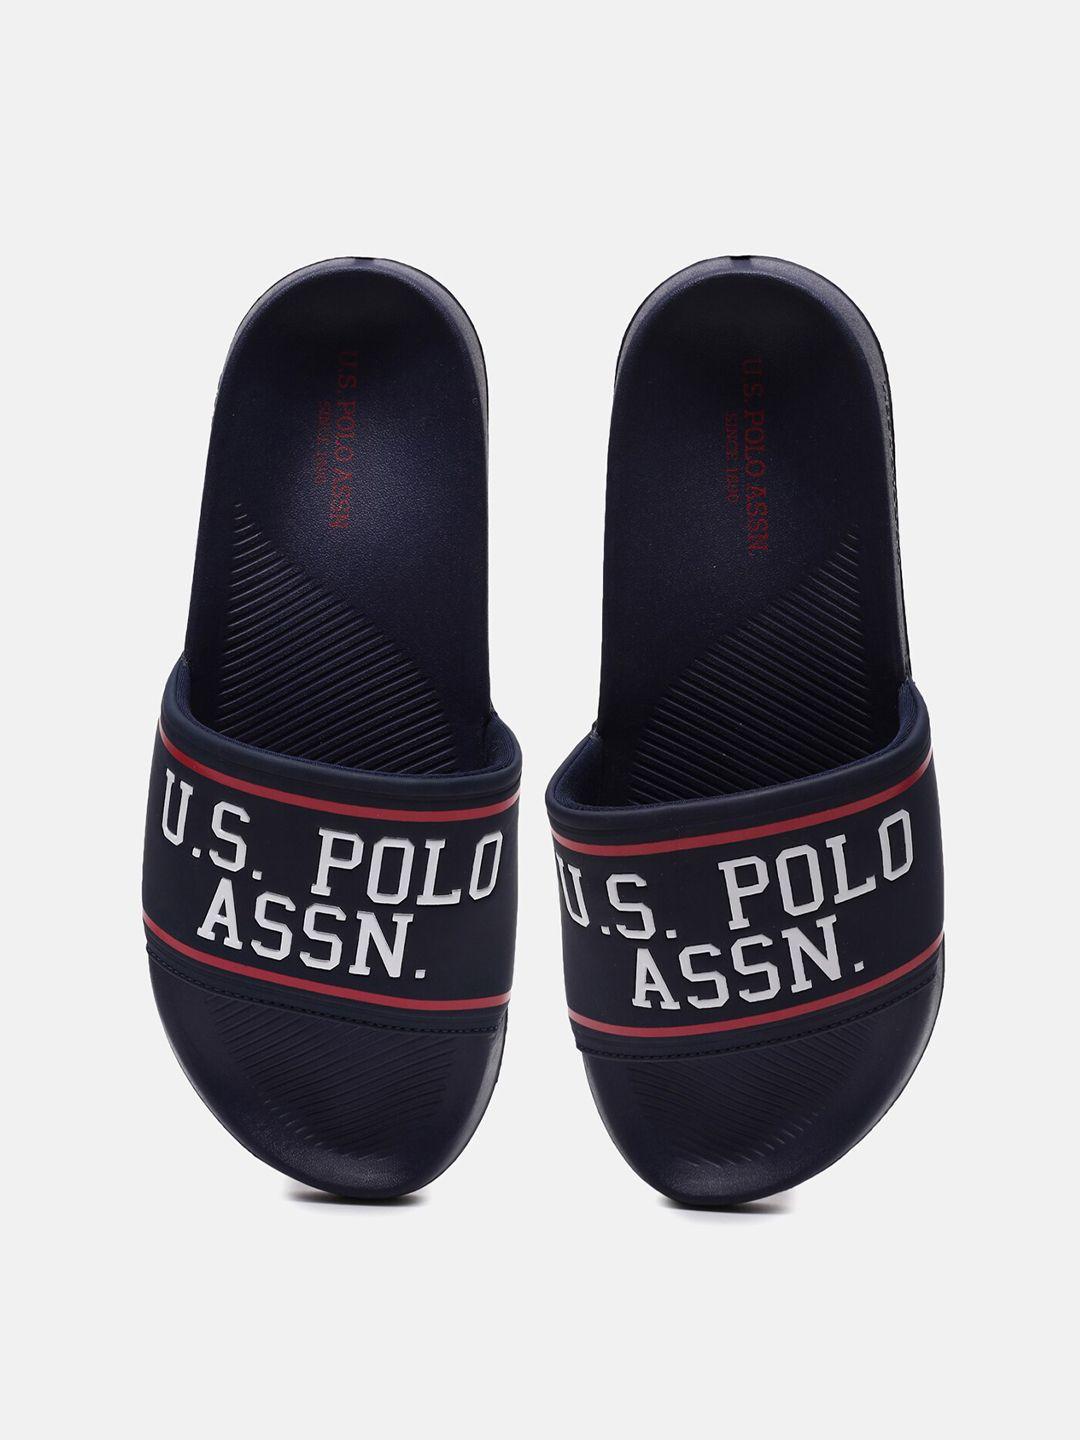 u s polo assn men navy blue & red printed sliders